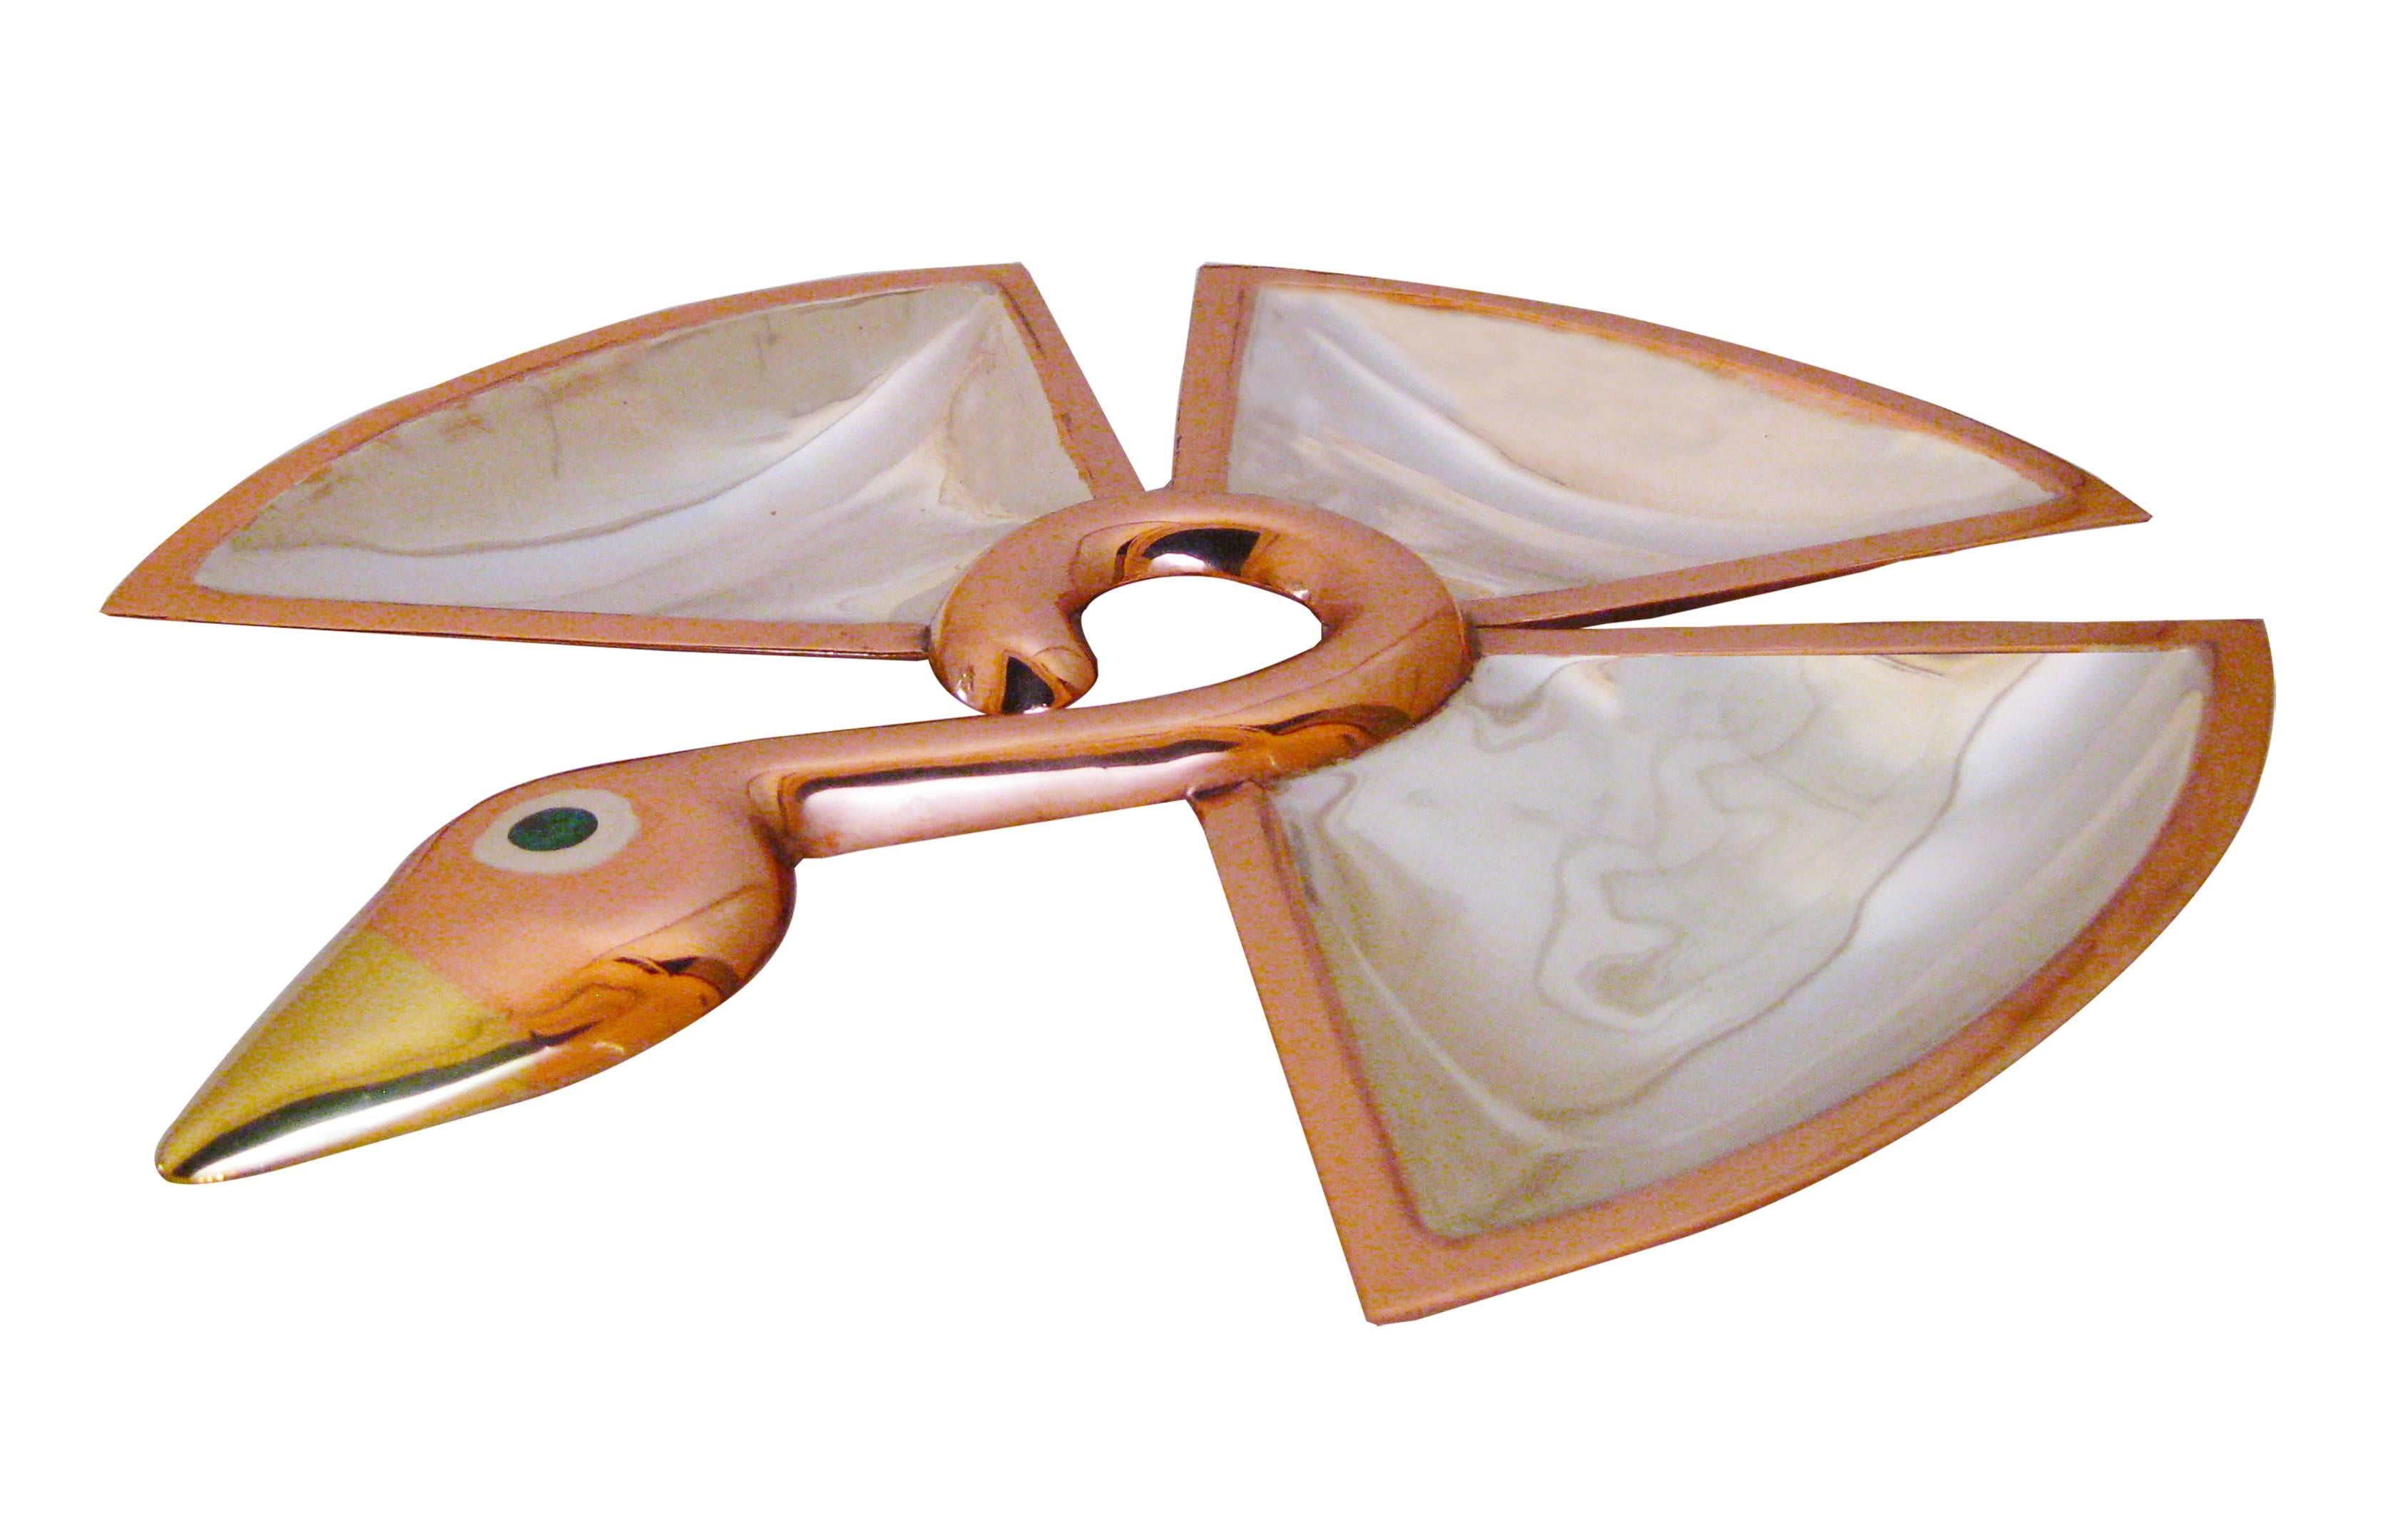 Iconic sculptural platter in the shape of a copper bird with an eye of jade and a brass beak. The three compartmentalized sections are melded in silver. Signed Los Castillo, Taxco, hand-wrought. In pristine condition.

Antonio Castillo began his